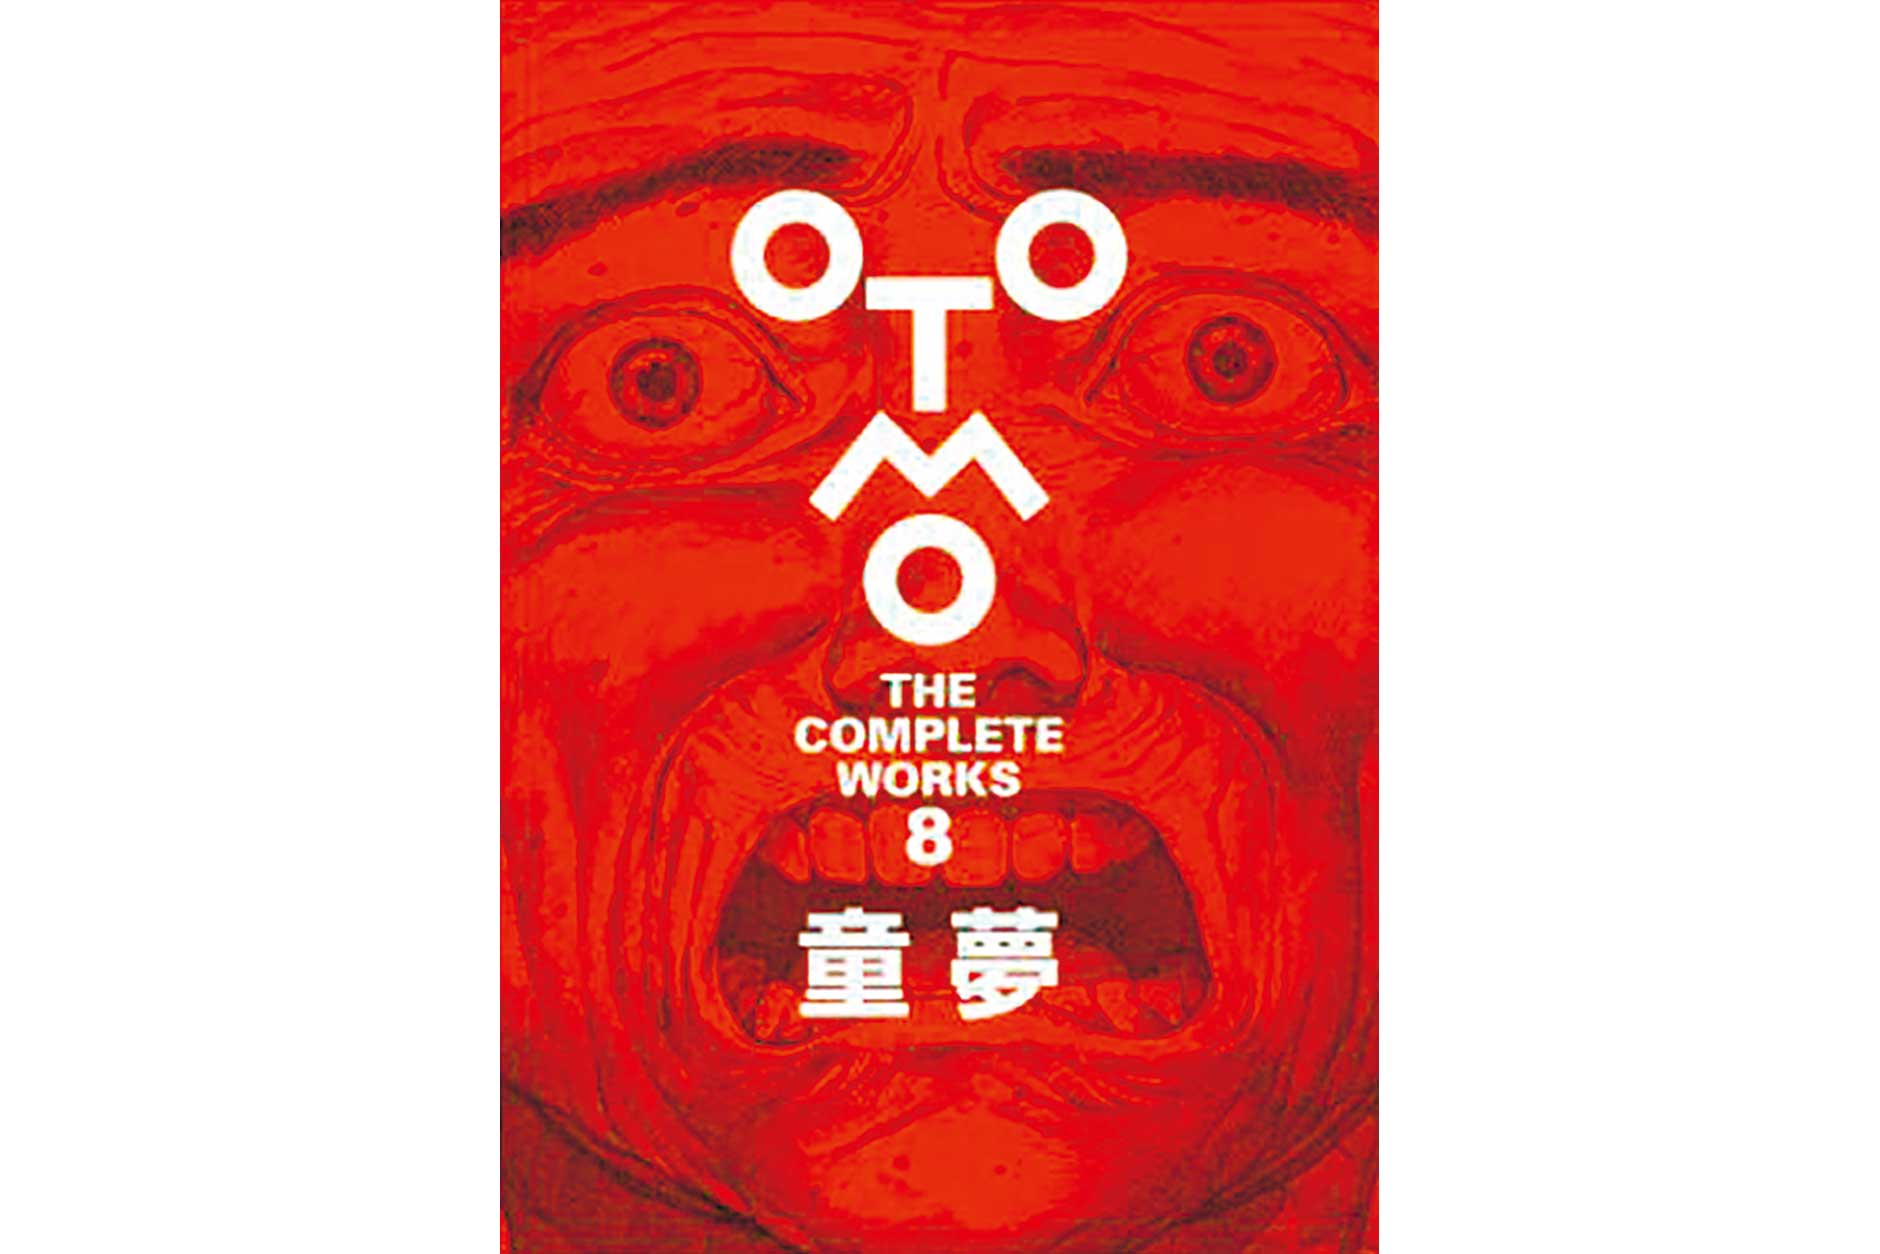 OTOMO THE COMPLETE WORKS 8 童夢